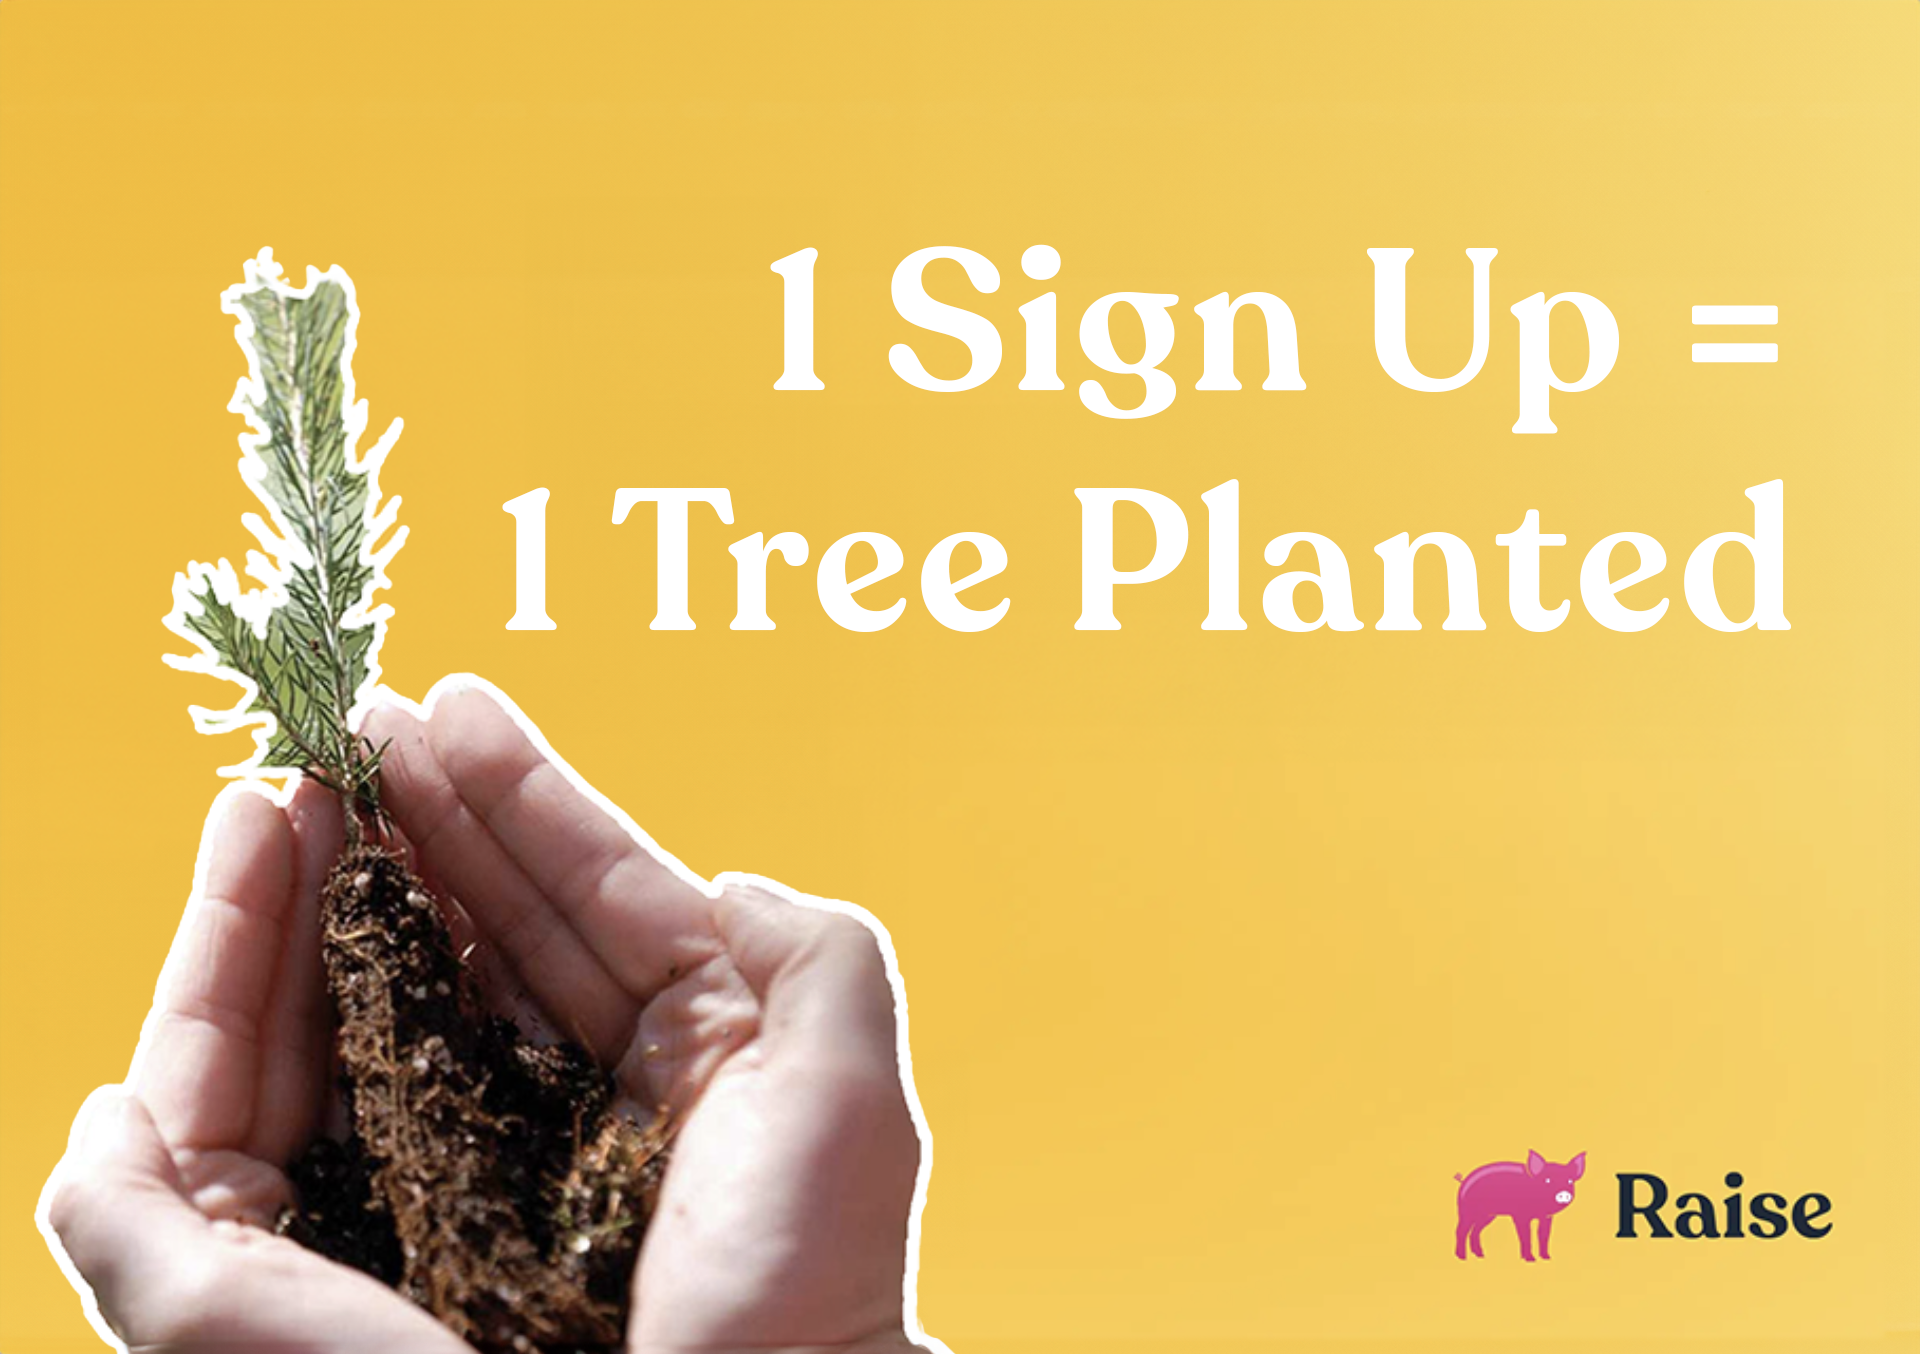 1 Sign Up = 1 Tree Planted